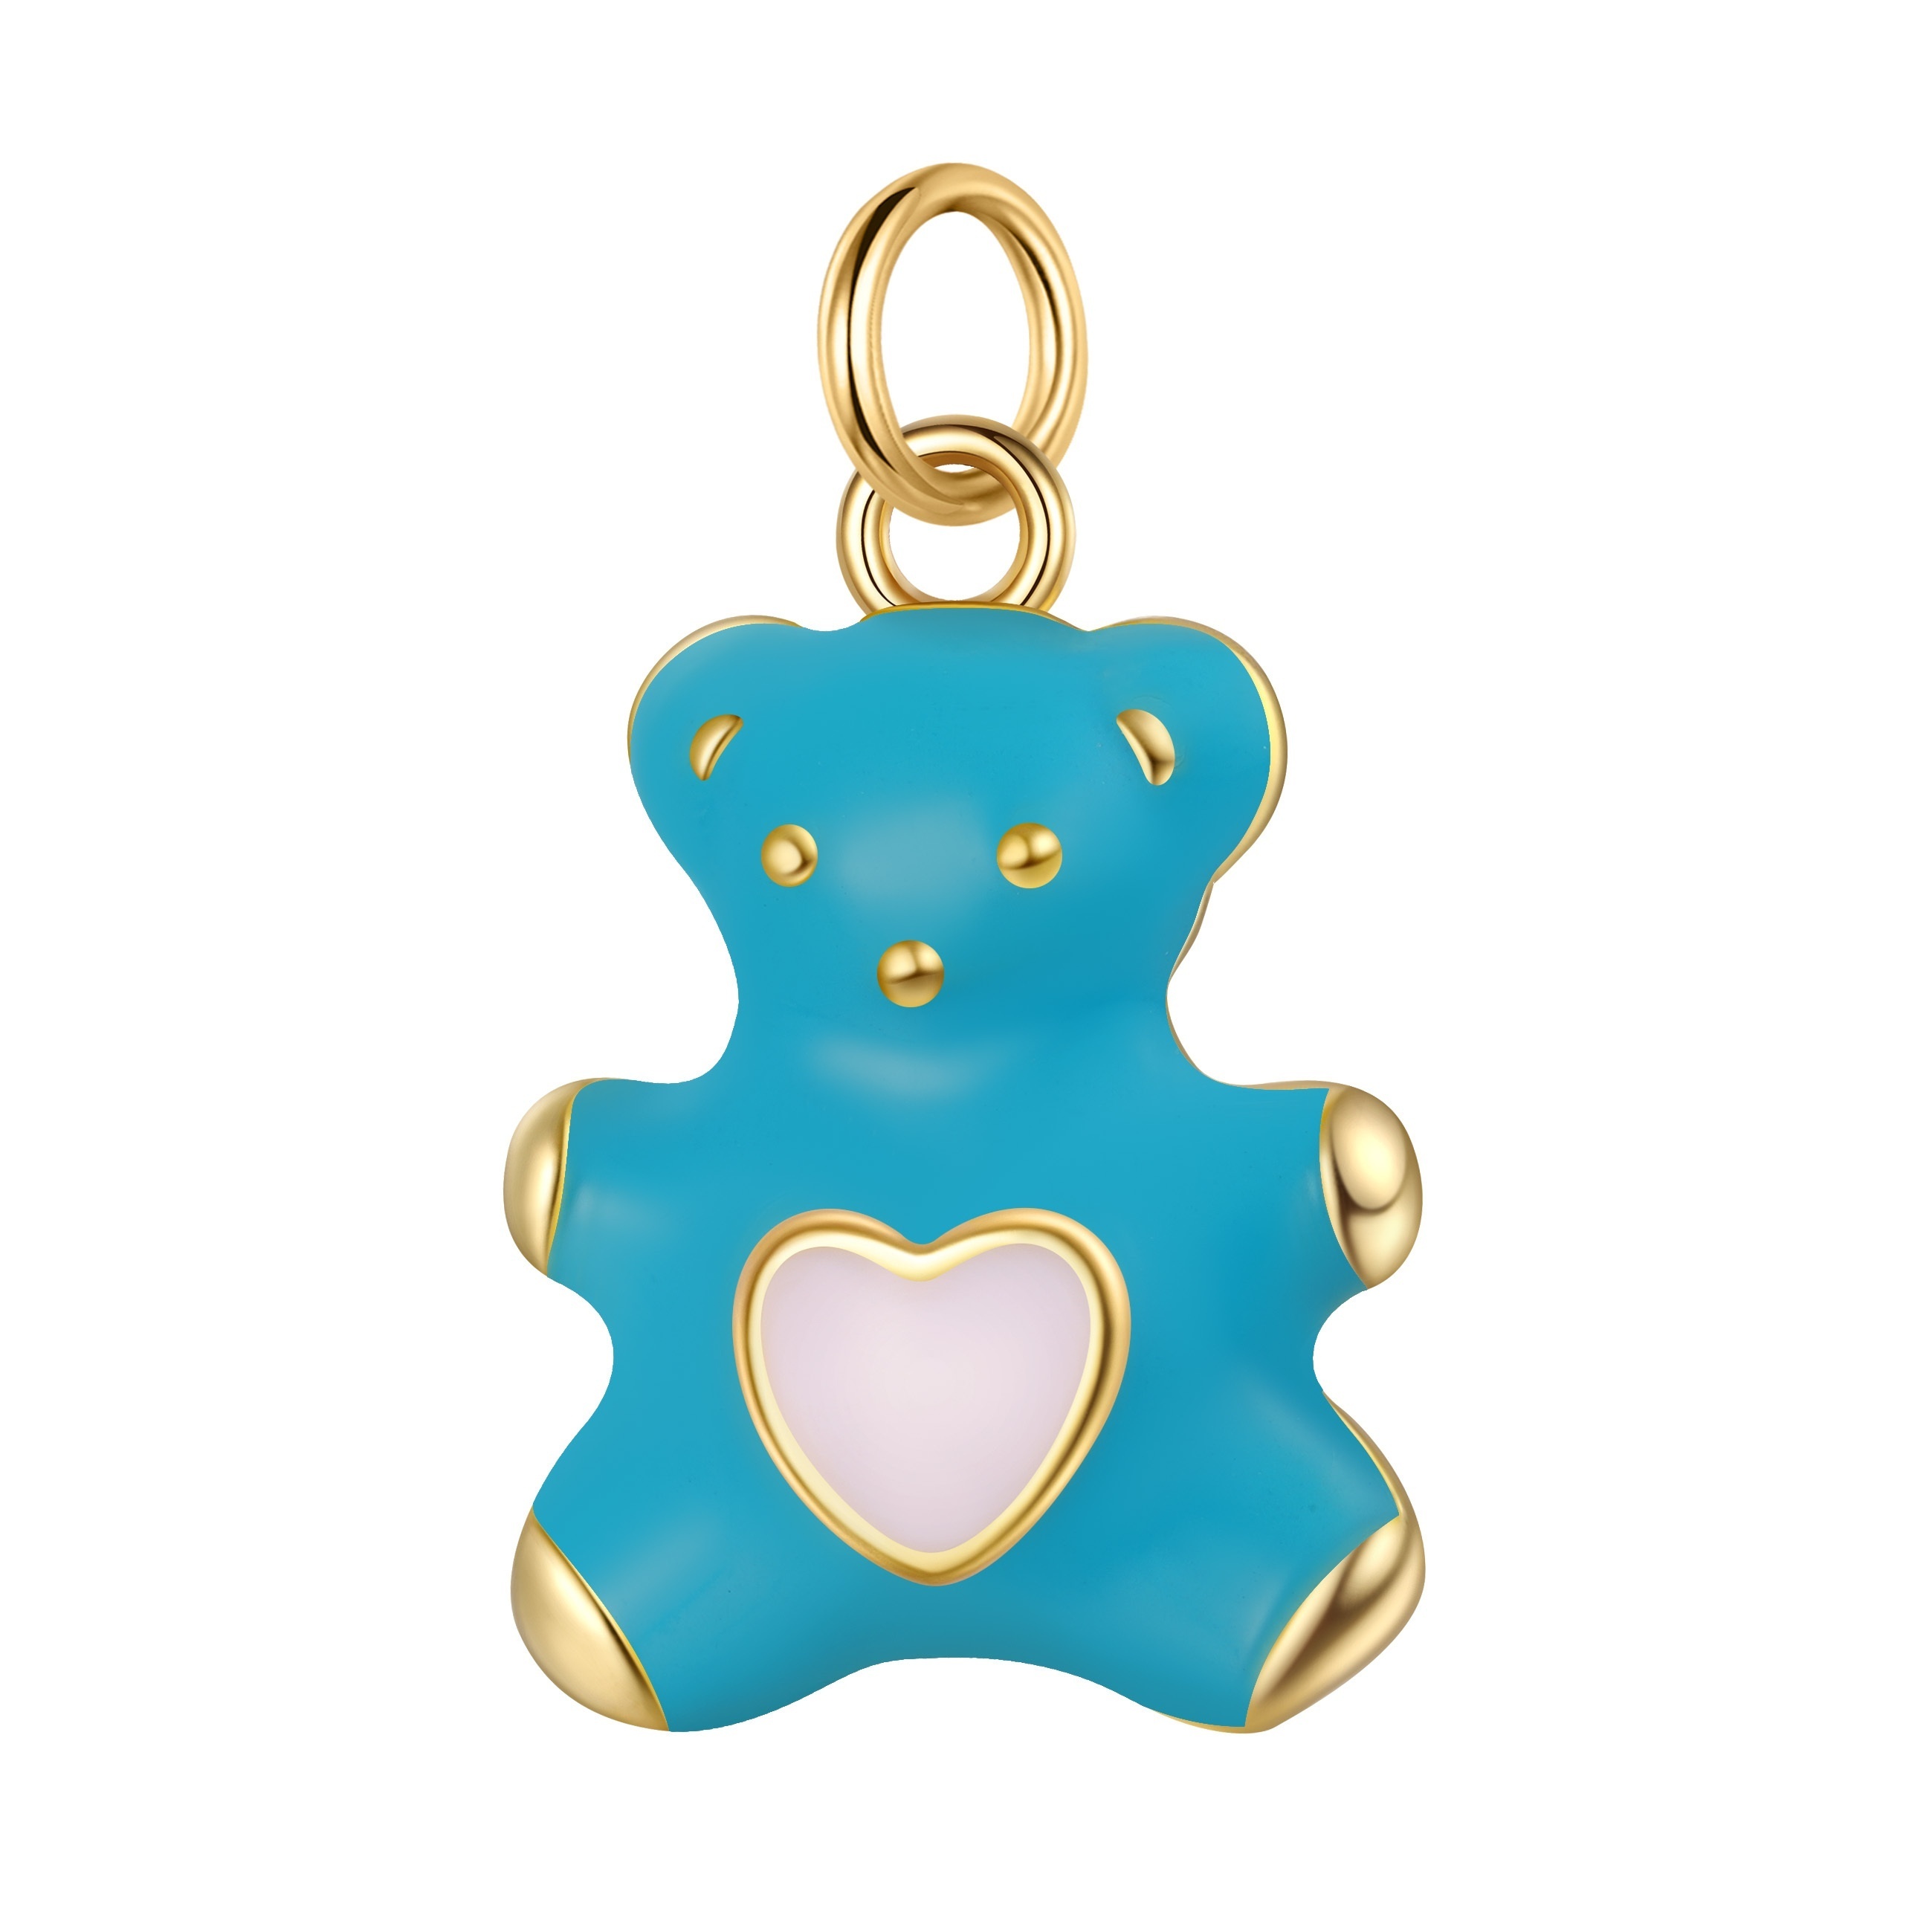 Tous Gold- and Red-Colored Teddy Bear Key Ring